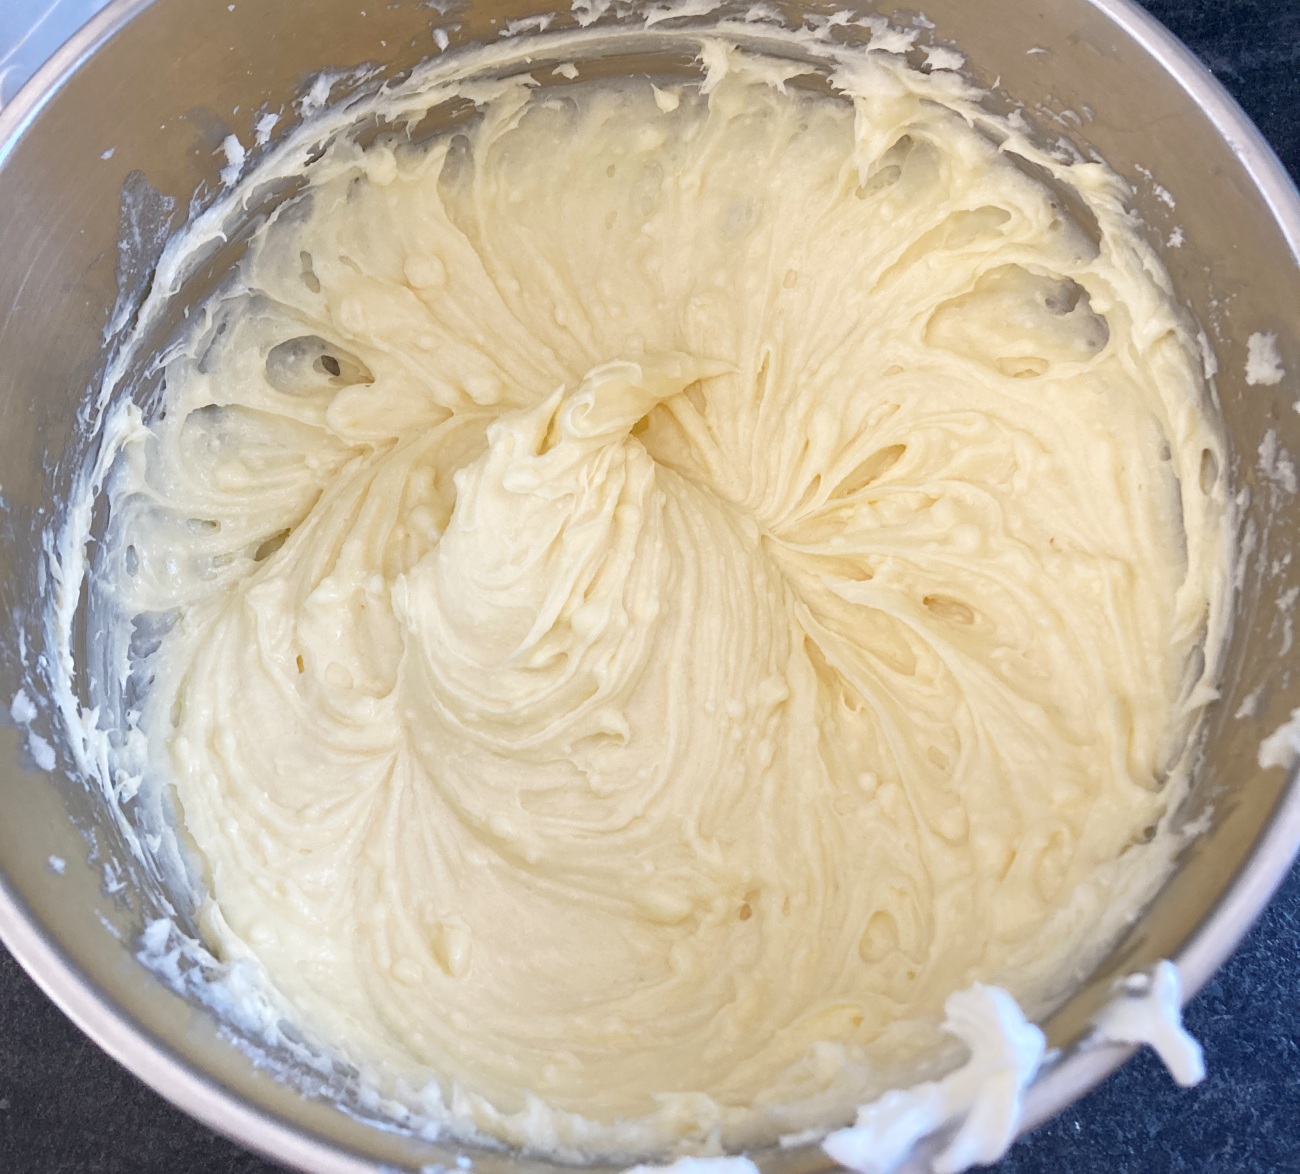 Cream together butter, cream cheese, and sugar. Add in egg and vanilla and stir well. Add 1 cup of flour to wet ingredients at a time, stirring each time. Then add salt and stir. Fold in chopped pecans.